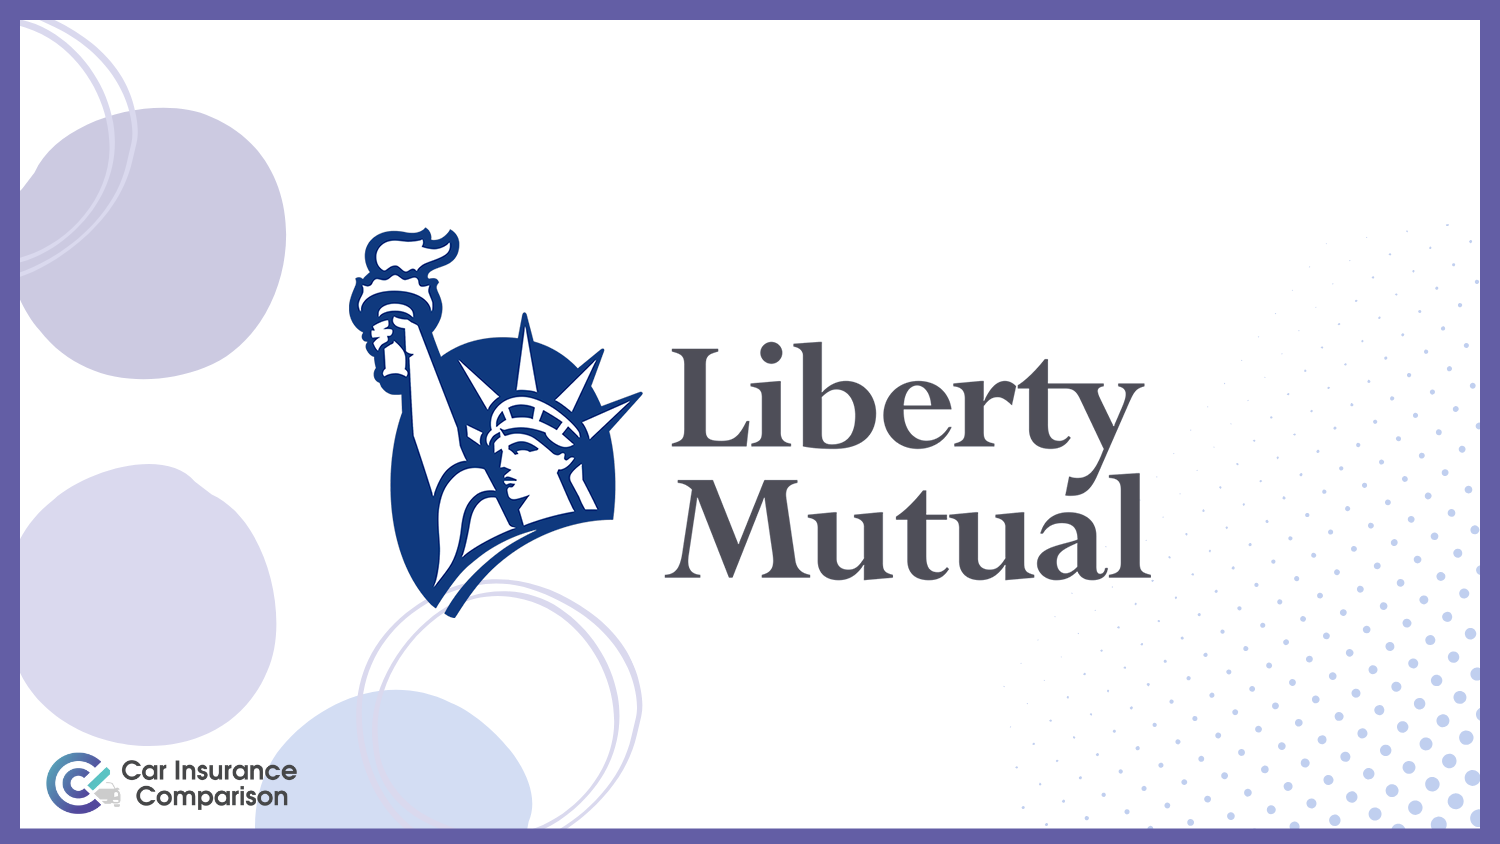 Liberty Mutual: Best Car Insurance for Undocumented Immigrants